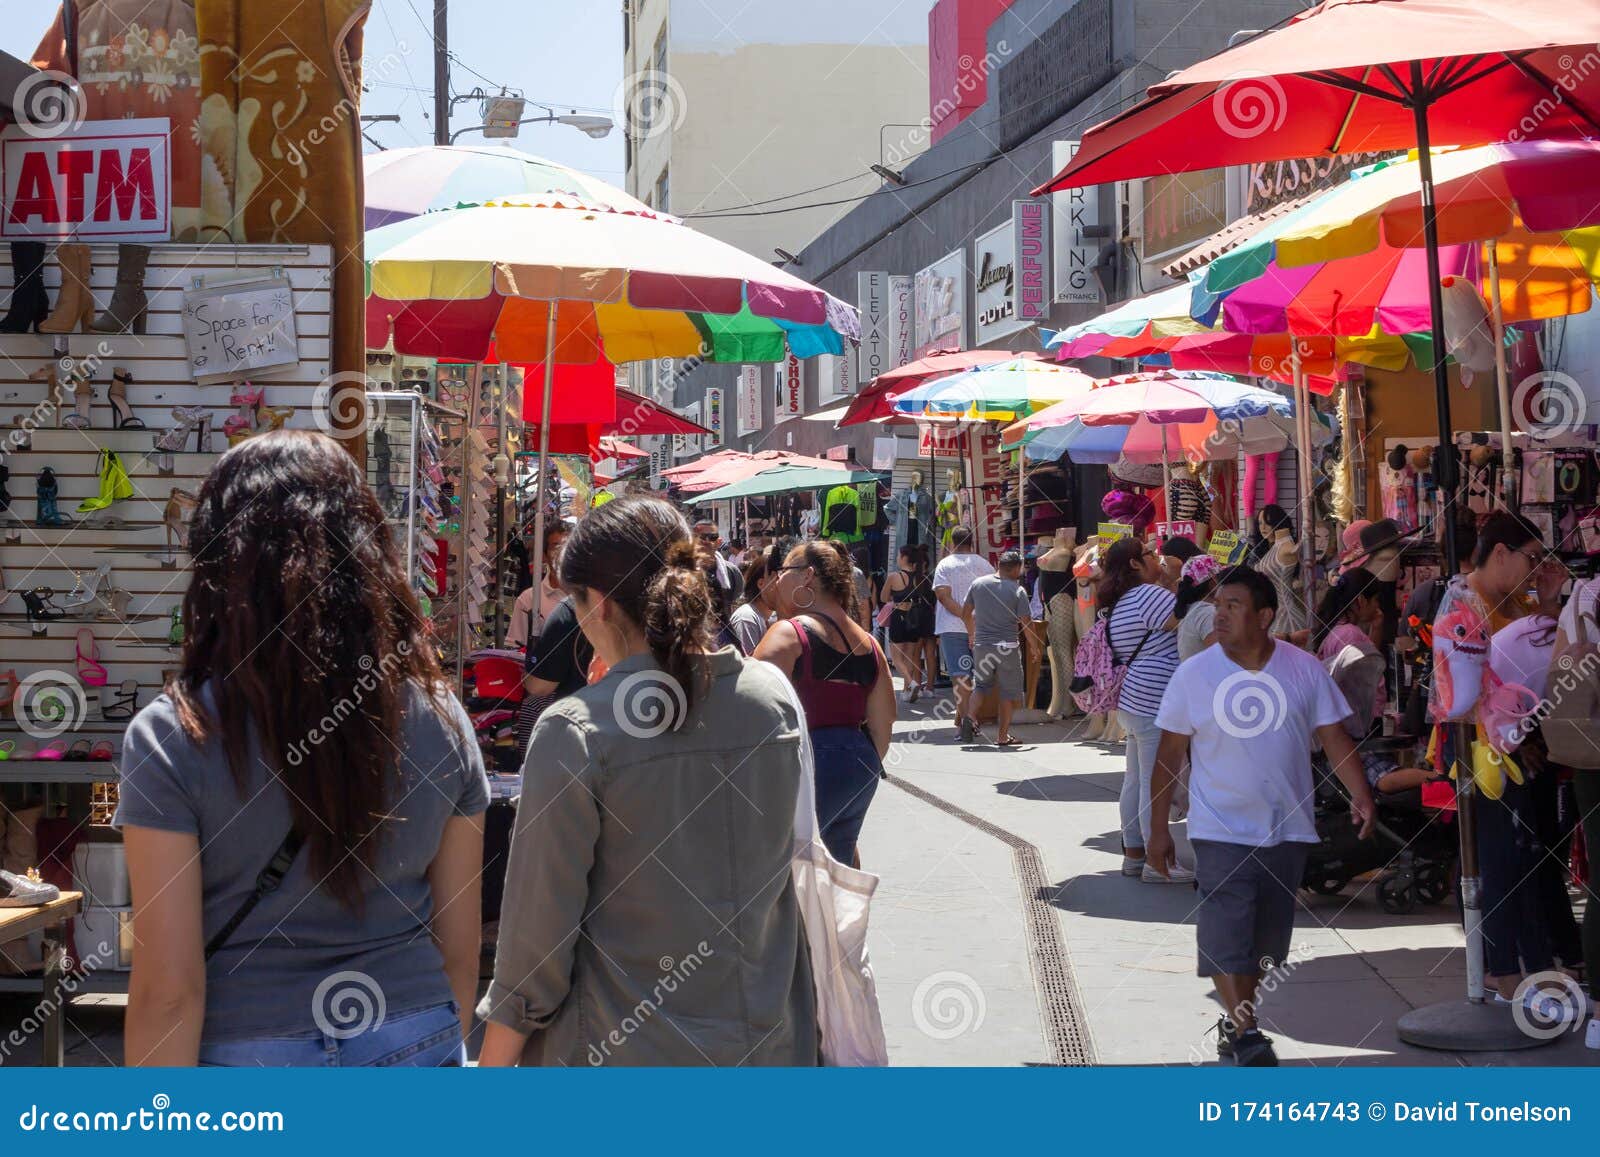 Santee Alley editorial stock photo. Image of downtown - 174164743